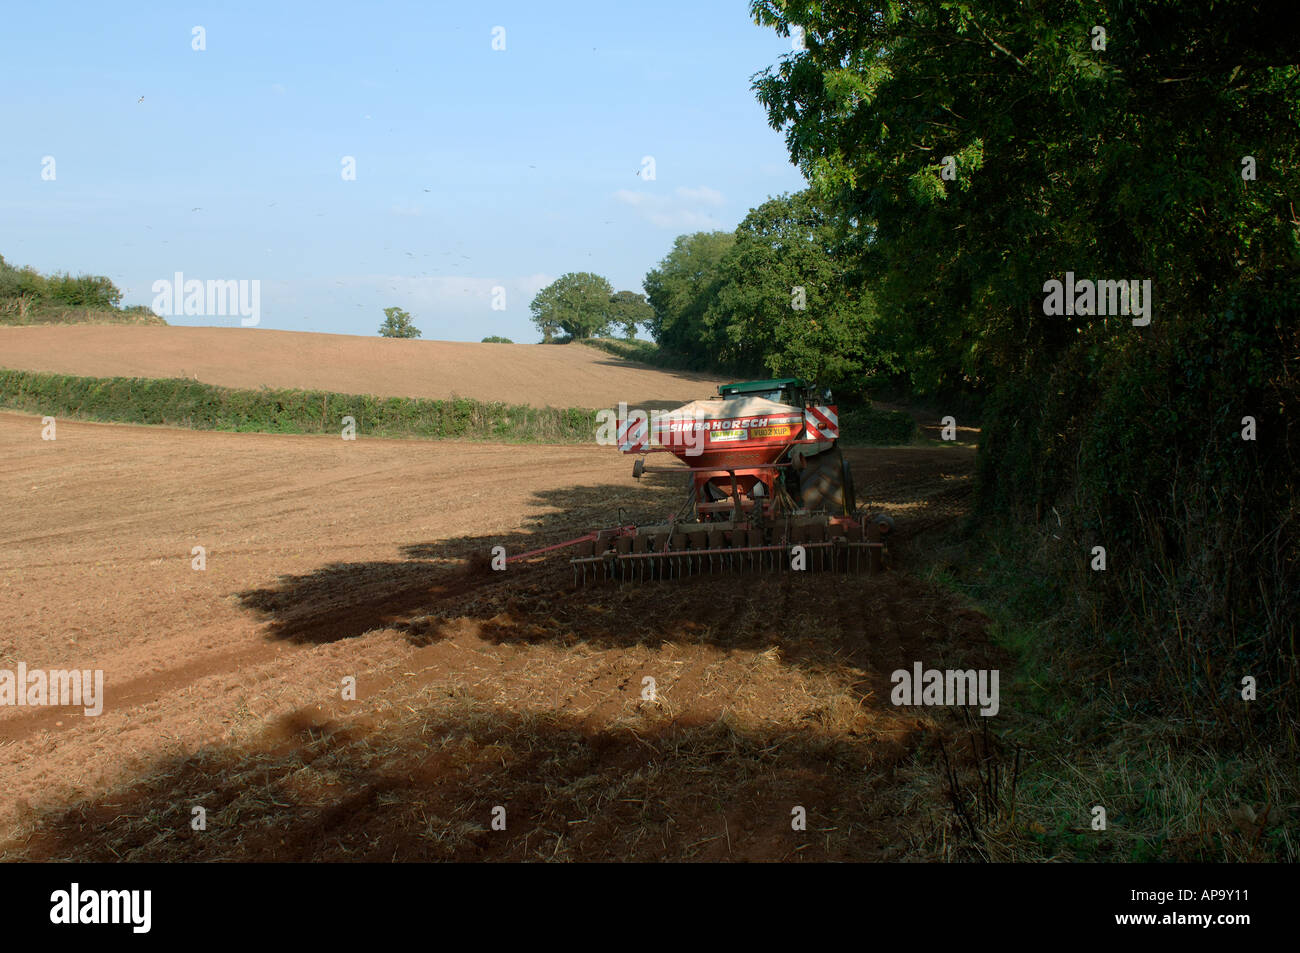 John Deere tractor Simba Horsch pneumatic drill in dappled shadows from the hedge trees Stock Photo